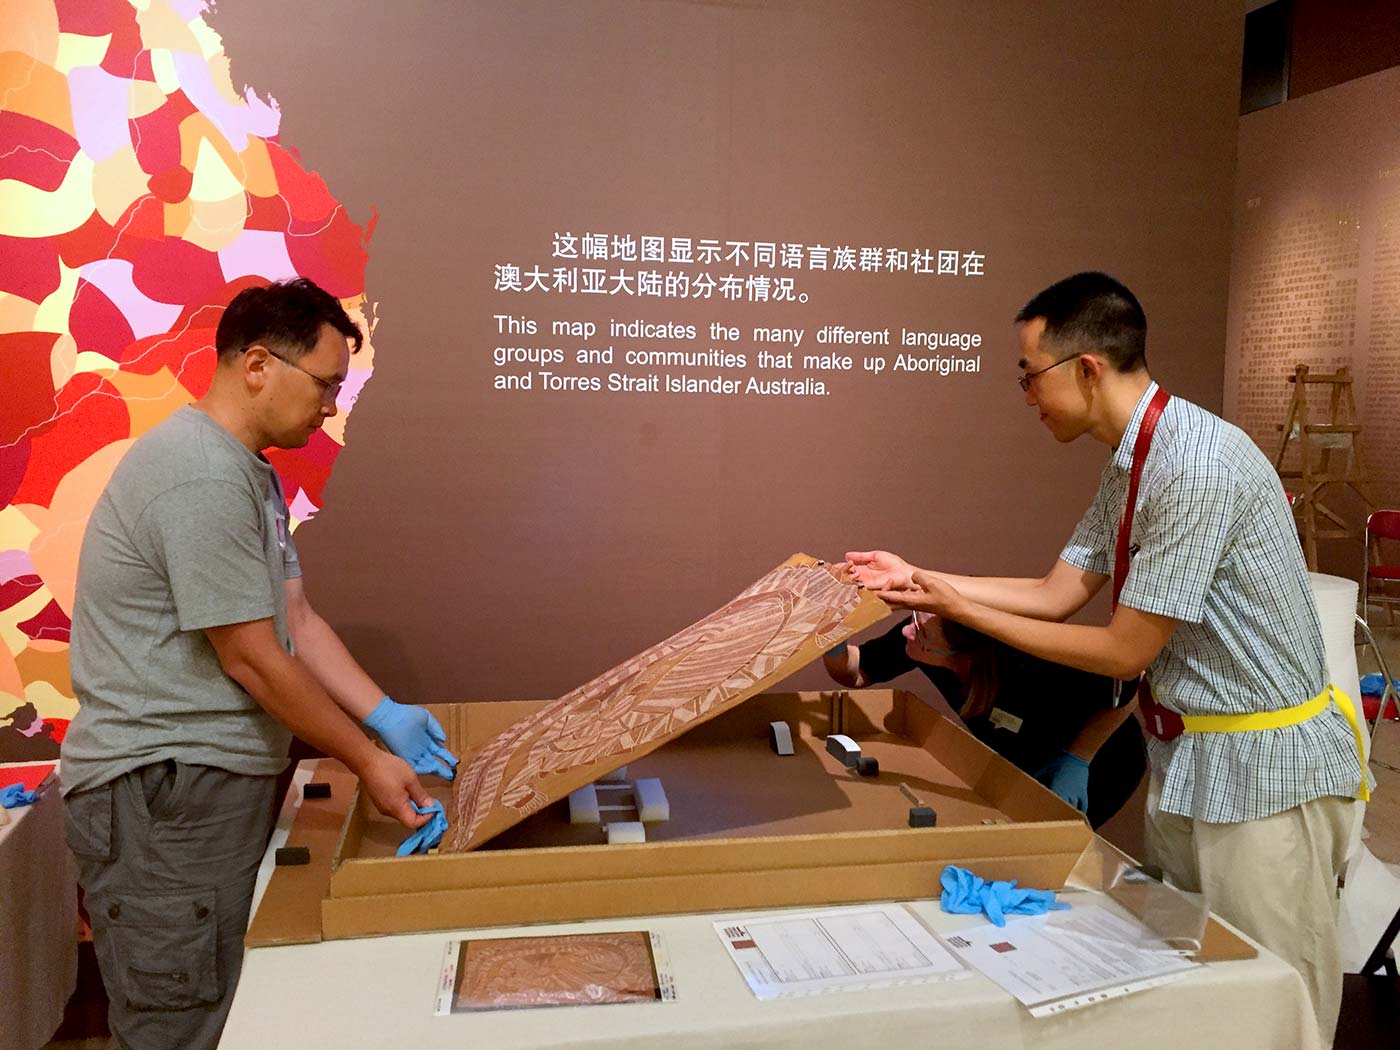 Museum staff lift a bark painting from its transportation box.